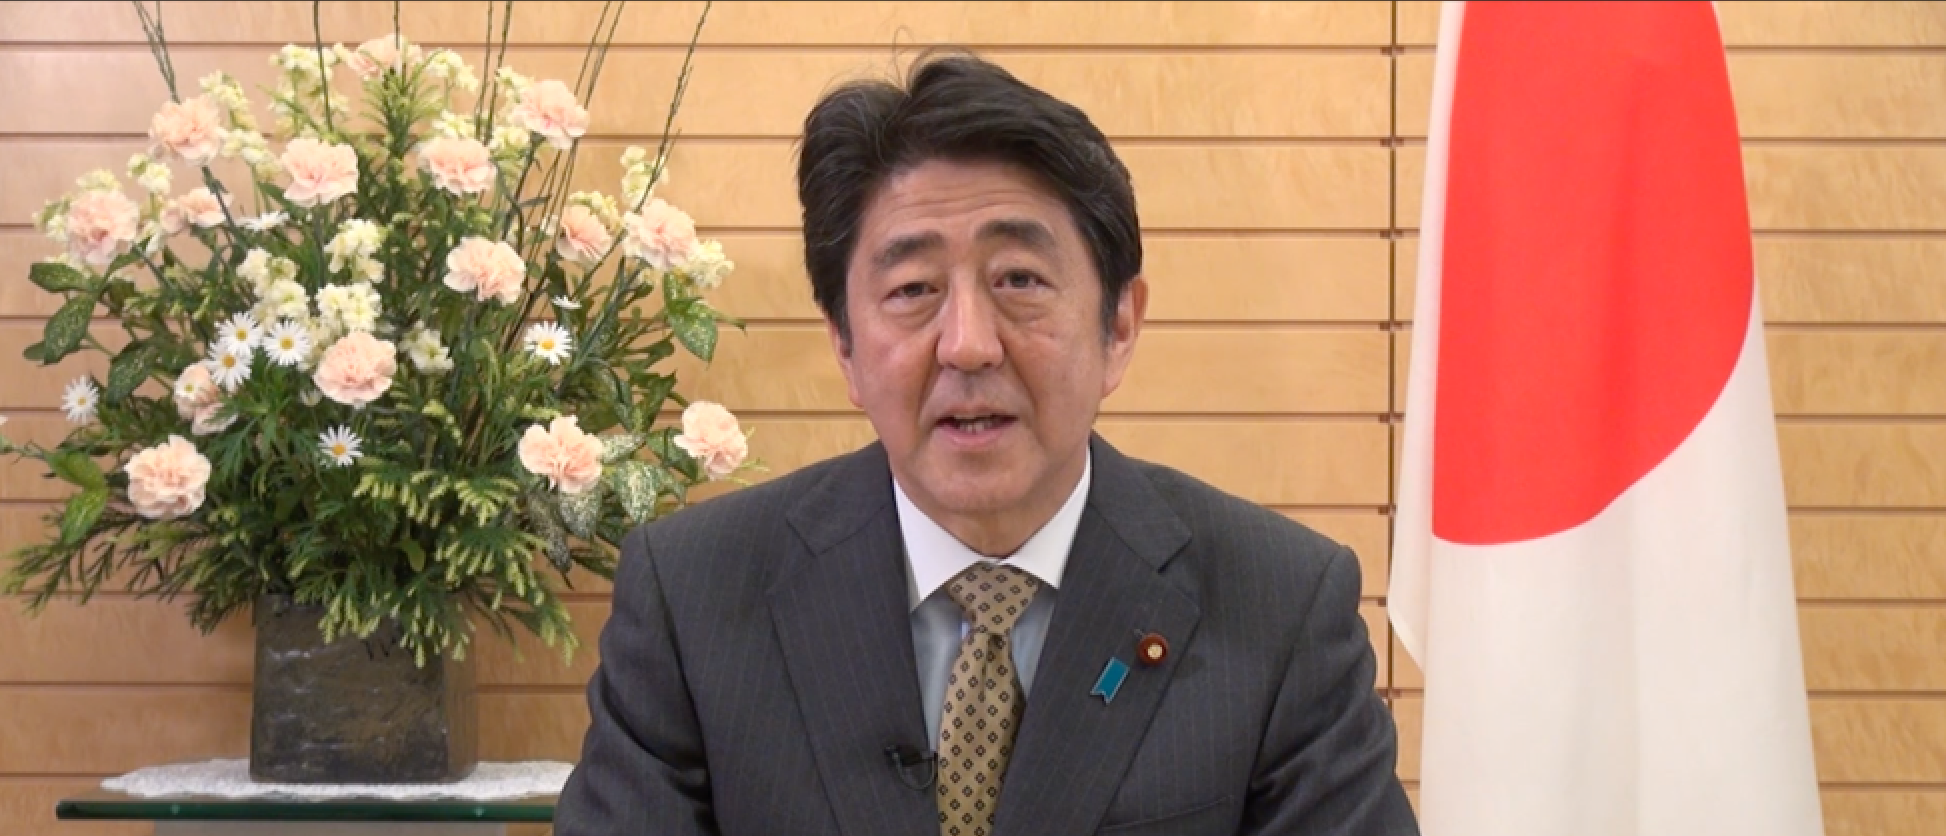 Prime Minister Shinzo Abe to speak at Global Cybersecurity Day 2021